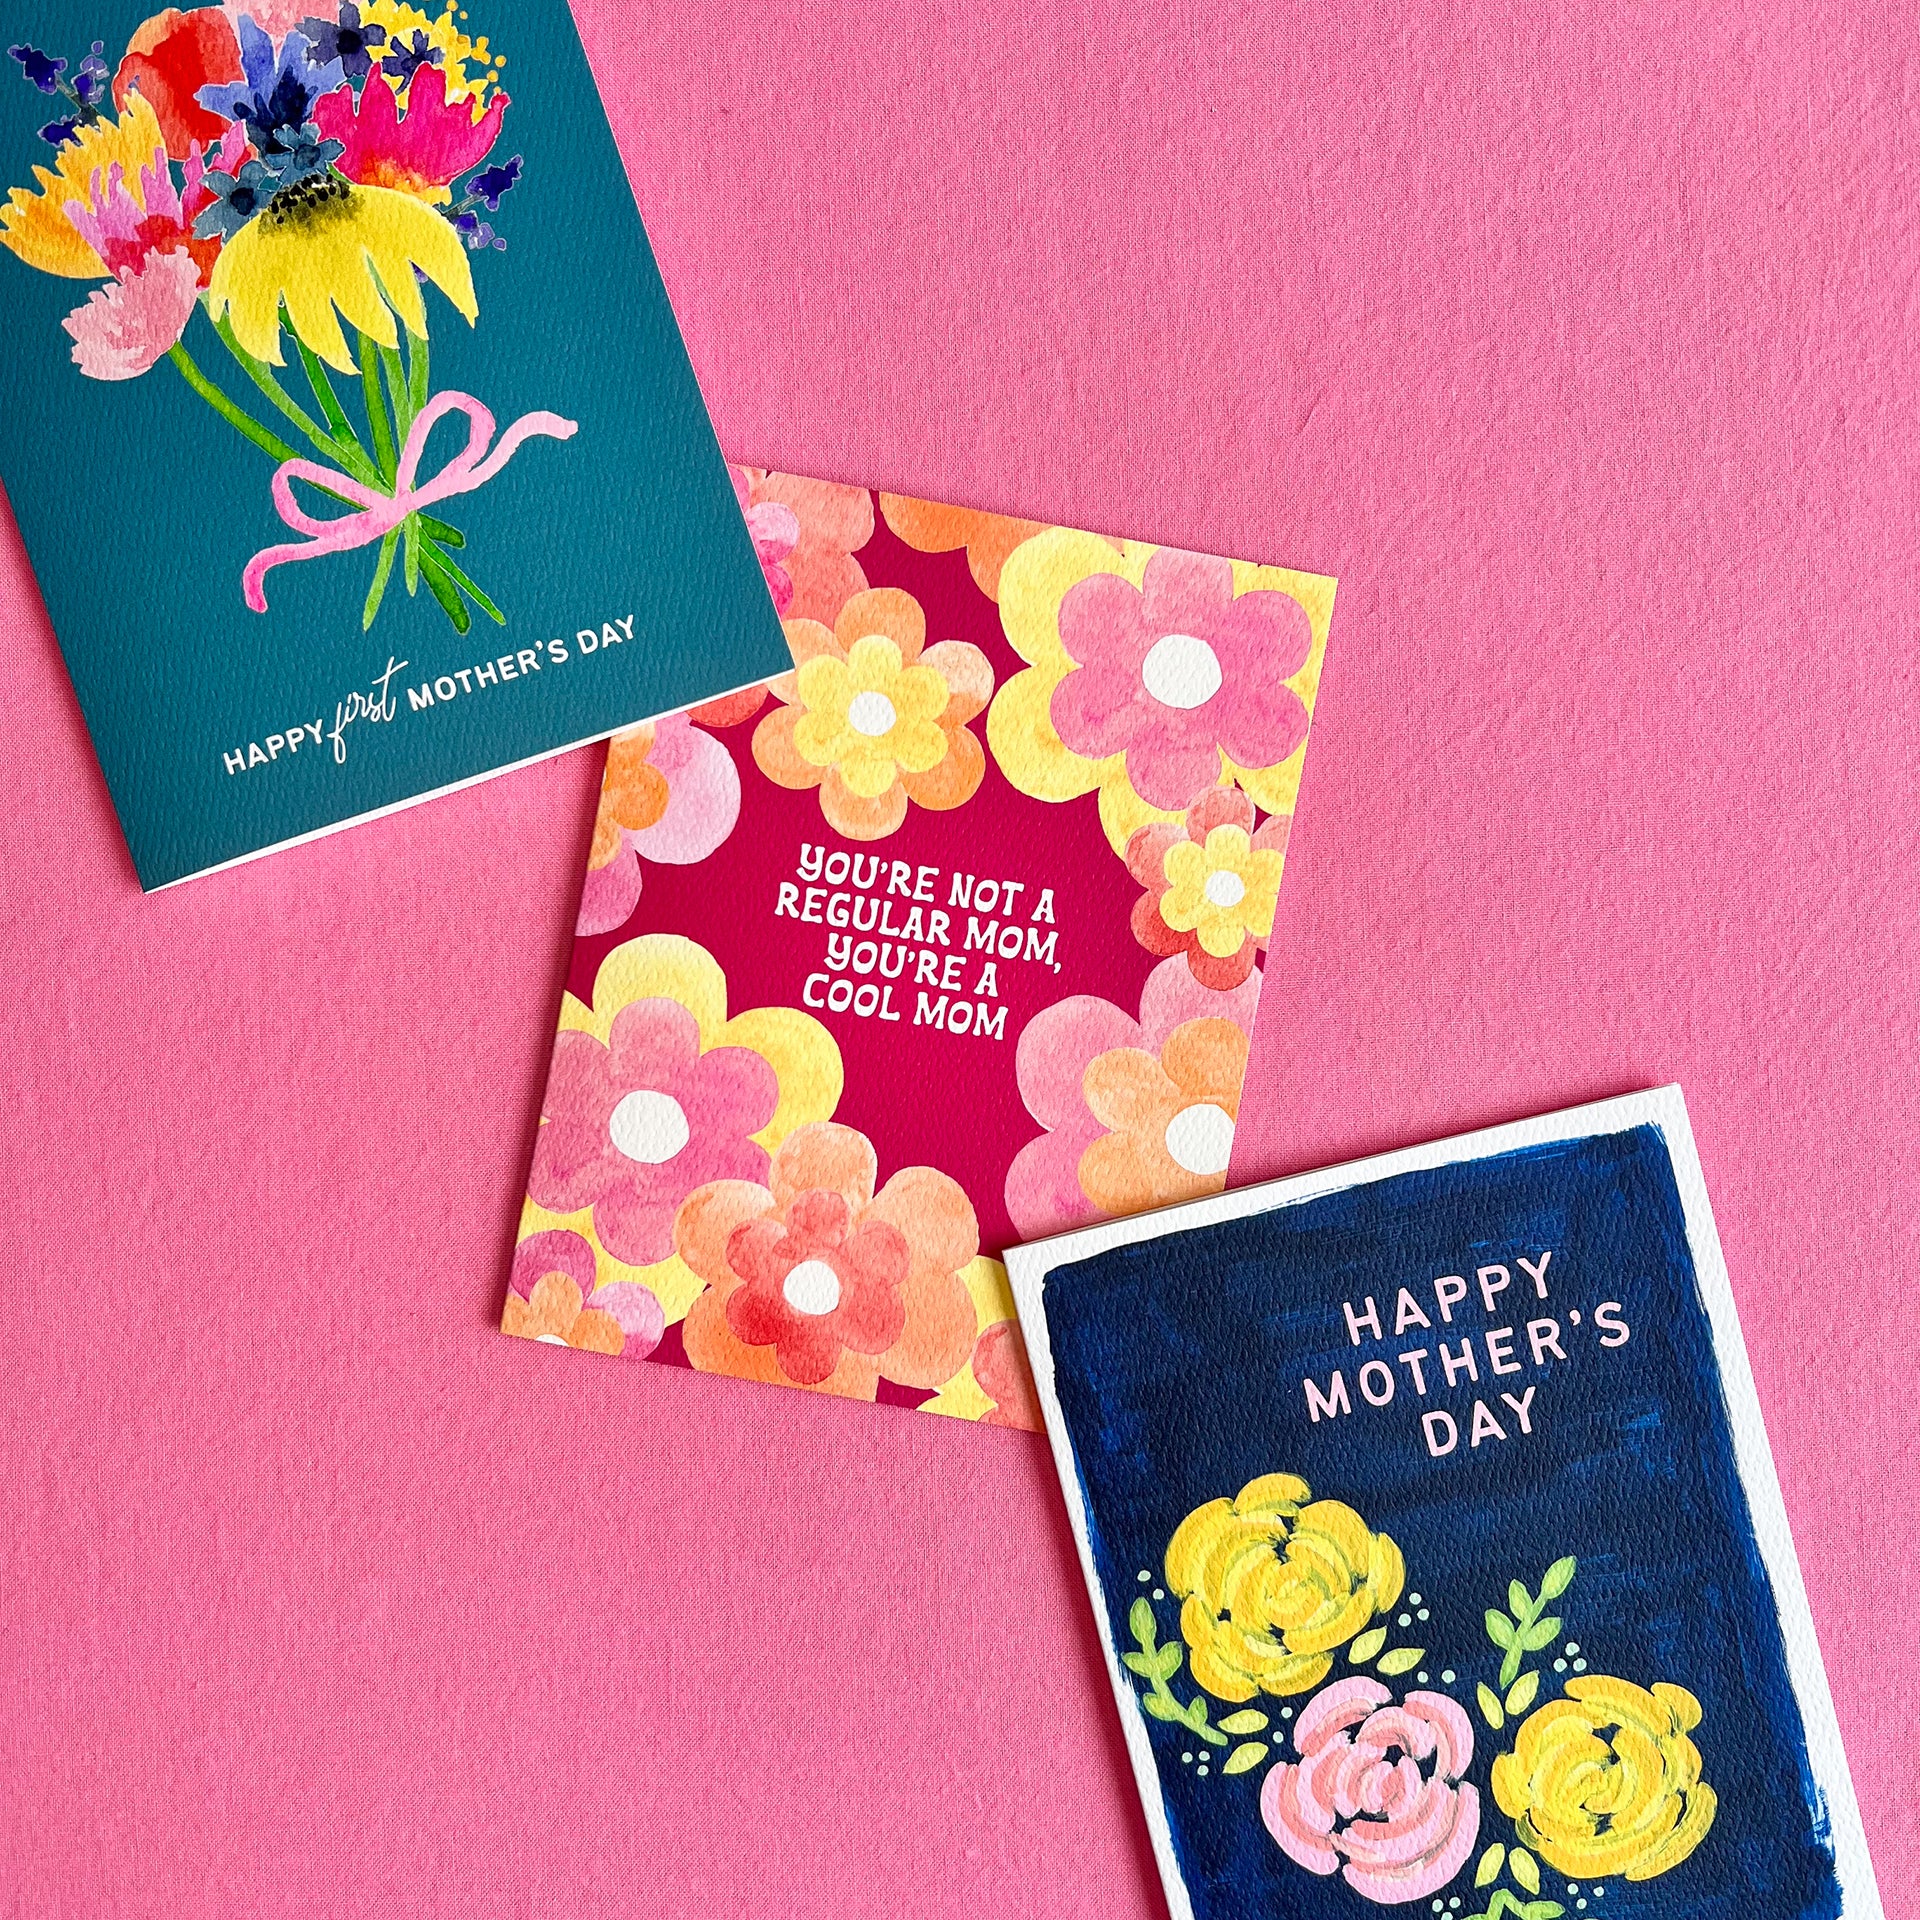 Mother's Day Greeting Cards by Gert & Co